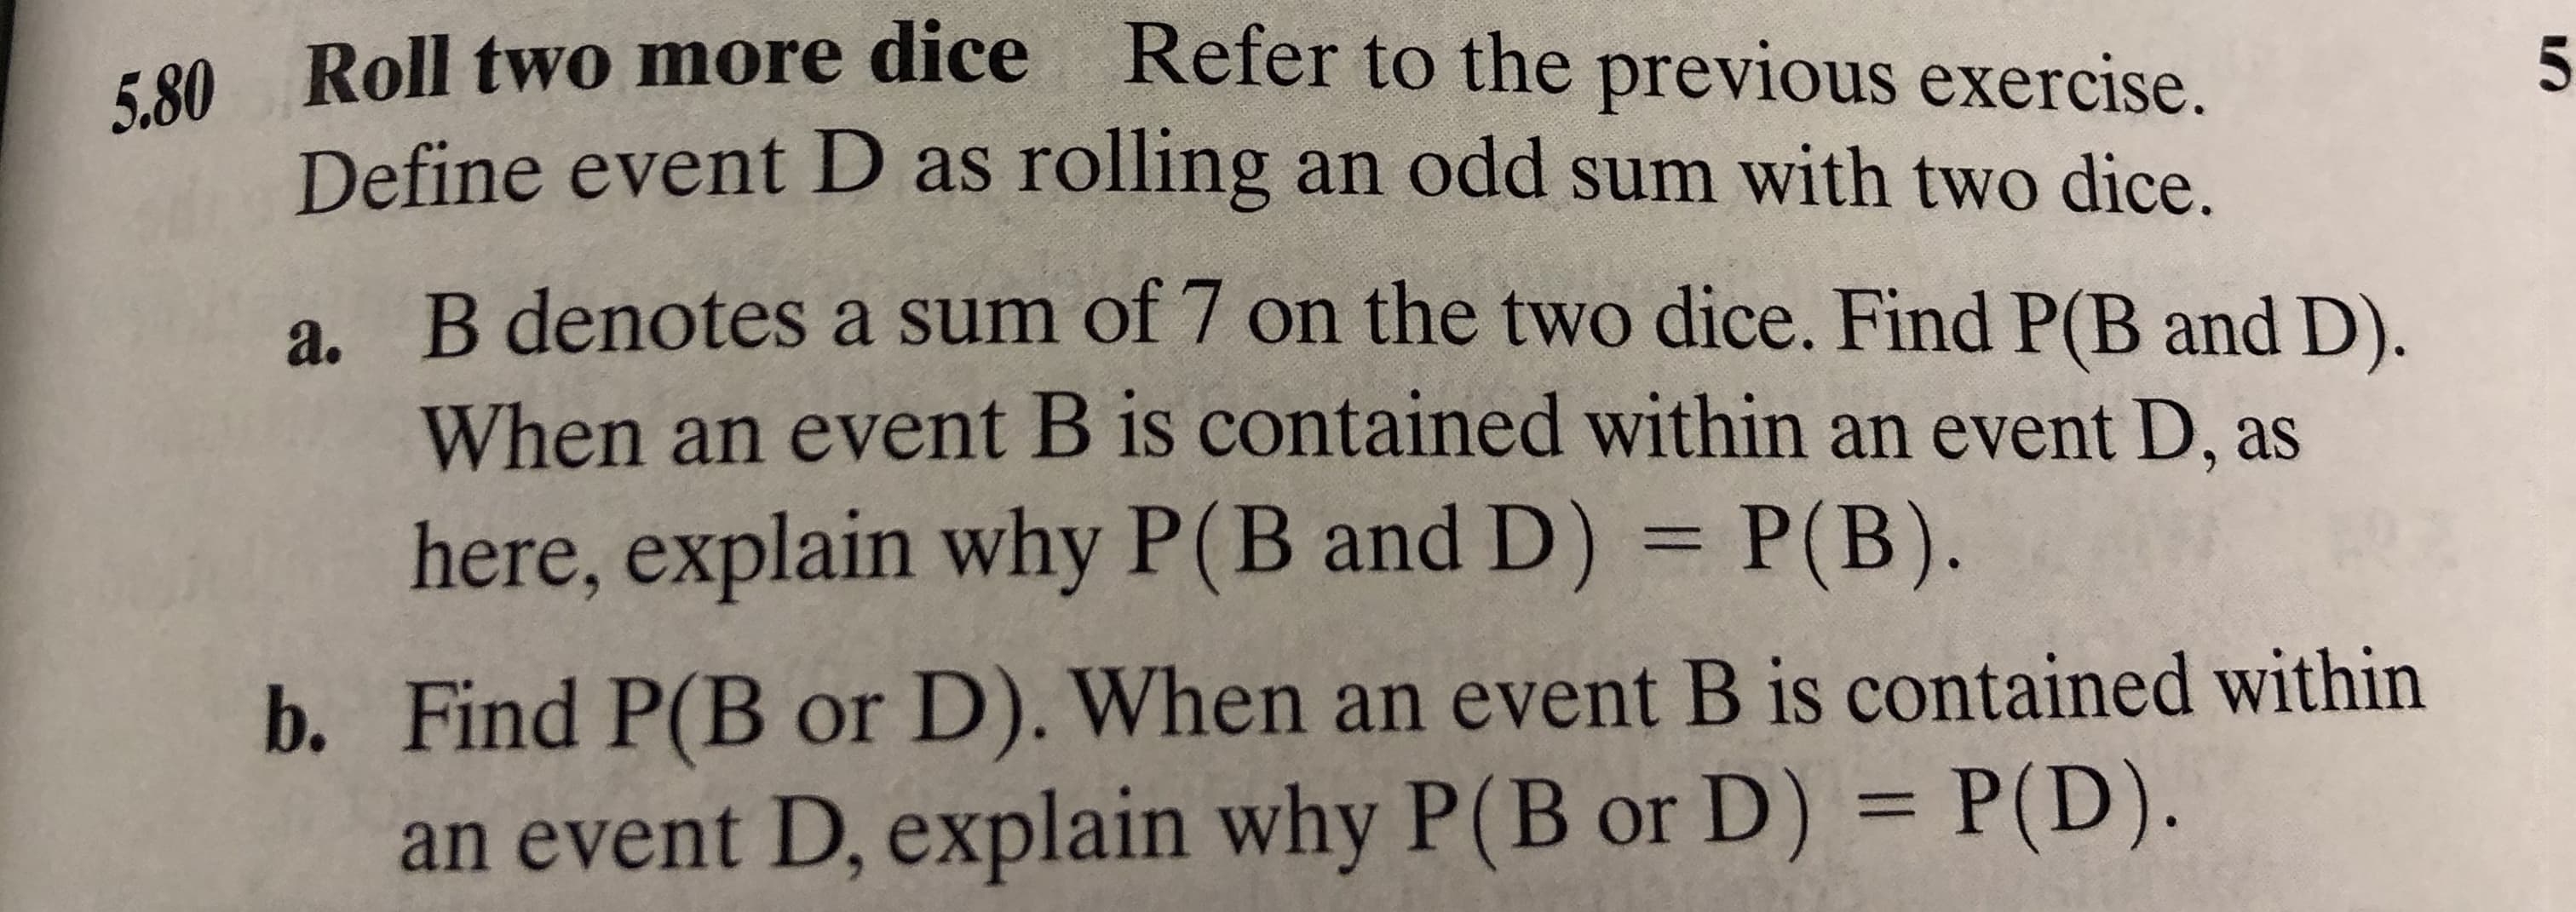 Roll two more dice
Refer to the previous exercise.
5.80
5
Define event D as rolling an odd sum with two dice.
a. B denotes a sum of 7 on the two dice. Find P(B and D).
When an event B is contained within an event D, as
here, explain why P(B and D) P(B).
b. Find P(B or D). When an event B is contained within
an event D, explain why P(B or D) = P(D).
